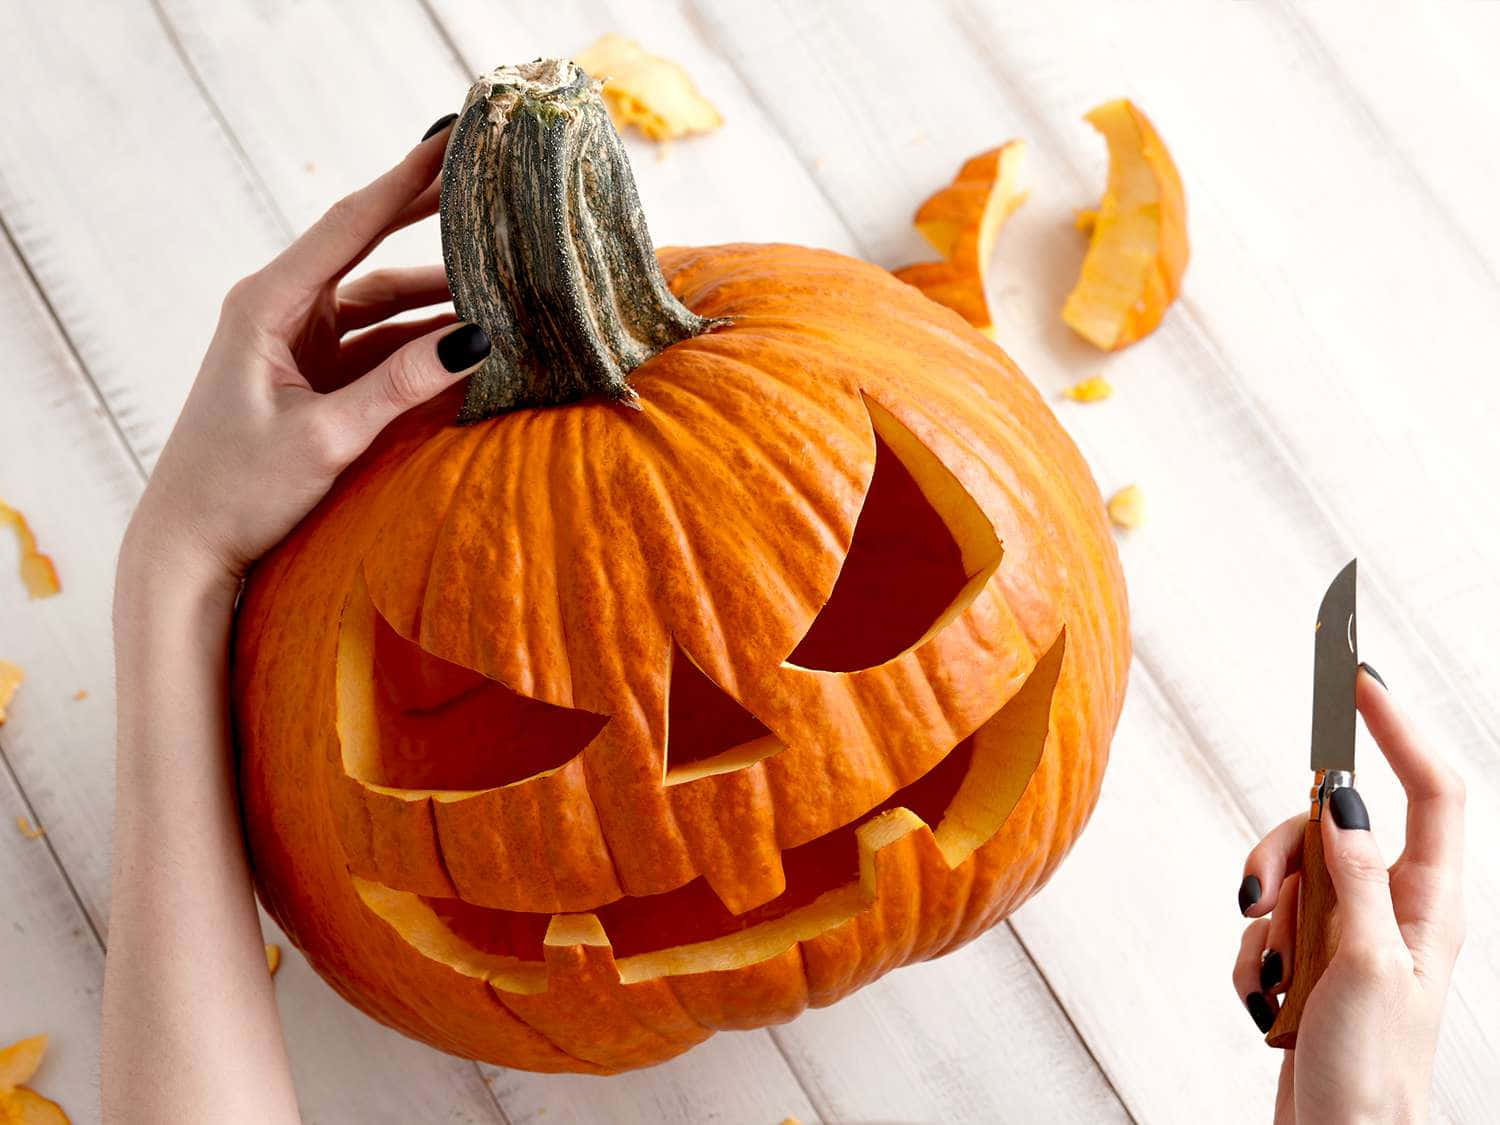 Get Ready for Halloween with This Creative Pumpkin Carving